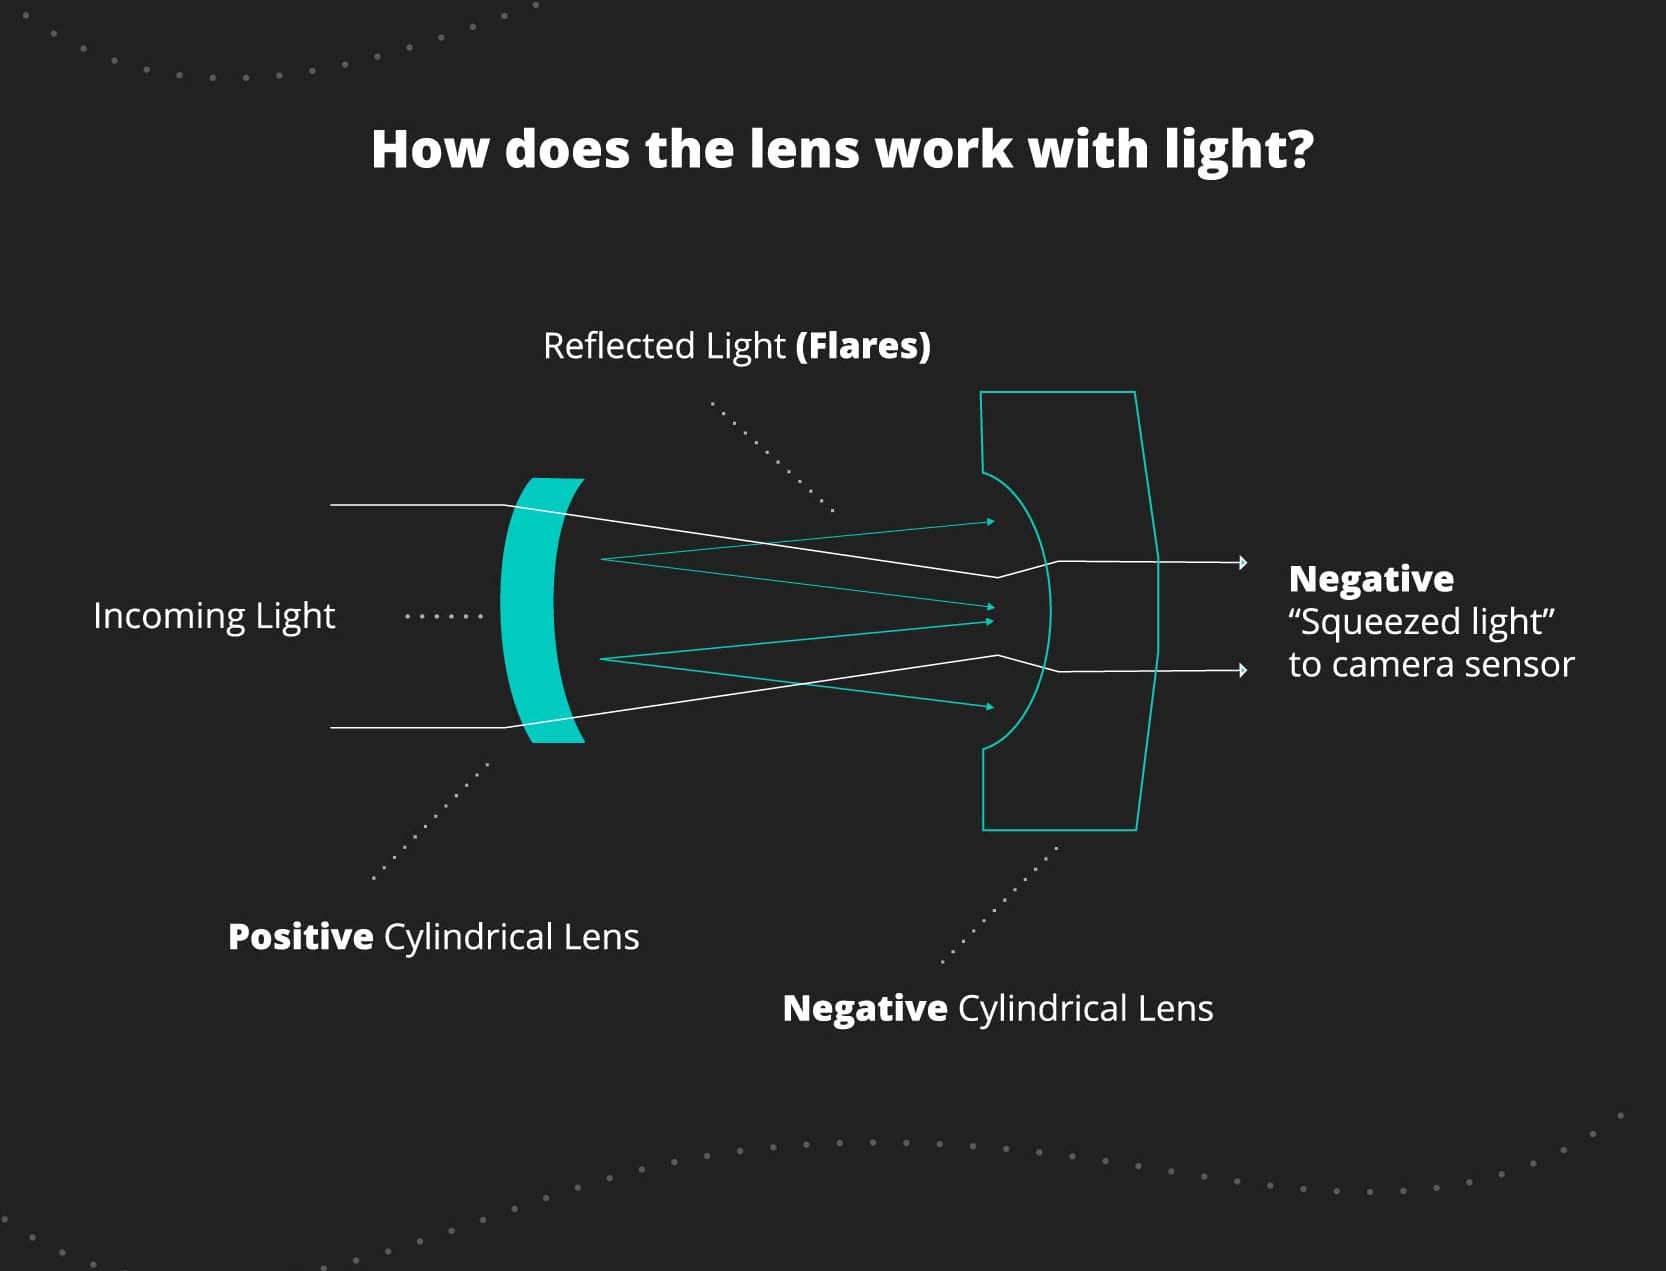 How does the anamorphic lens work with light?